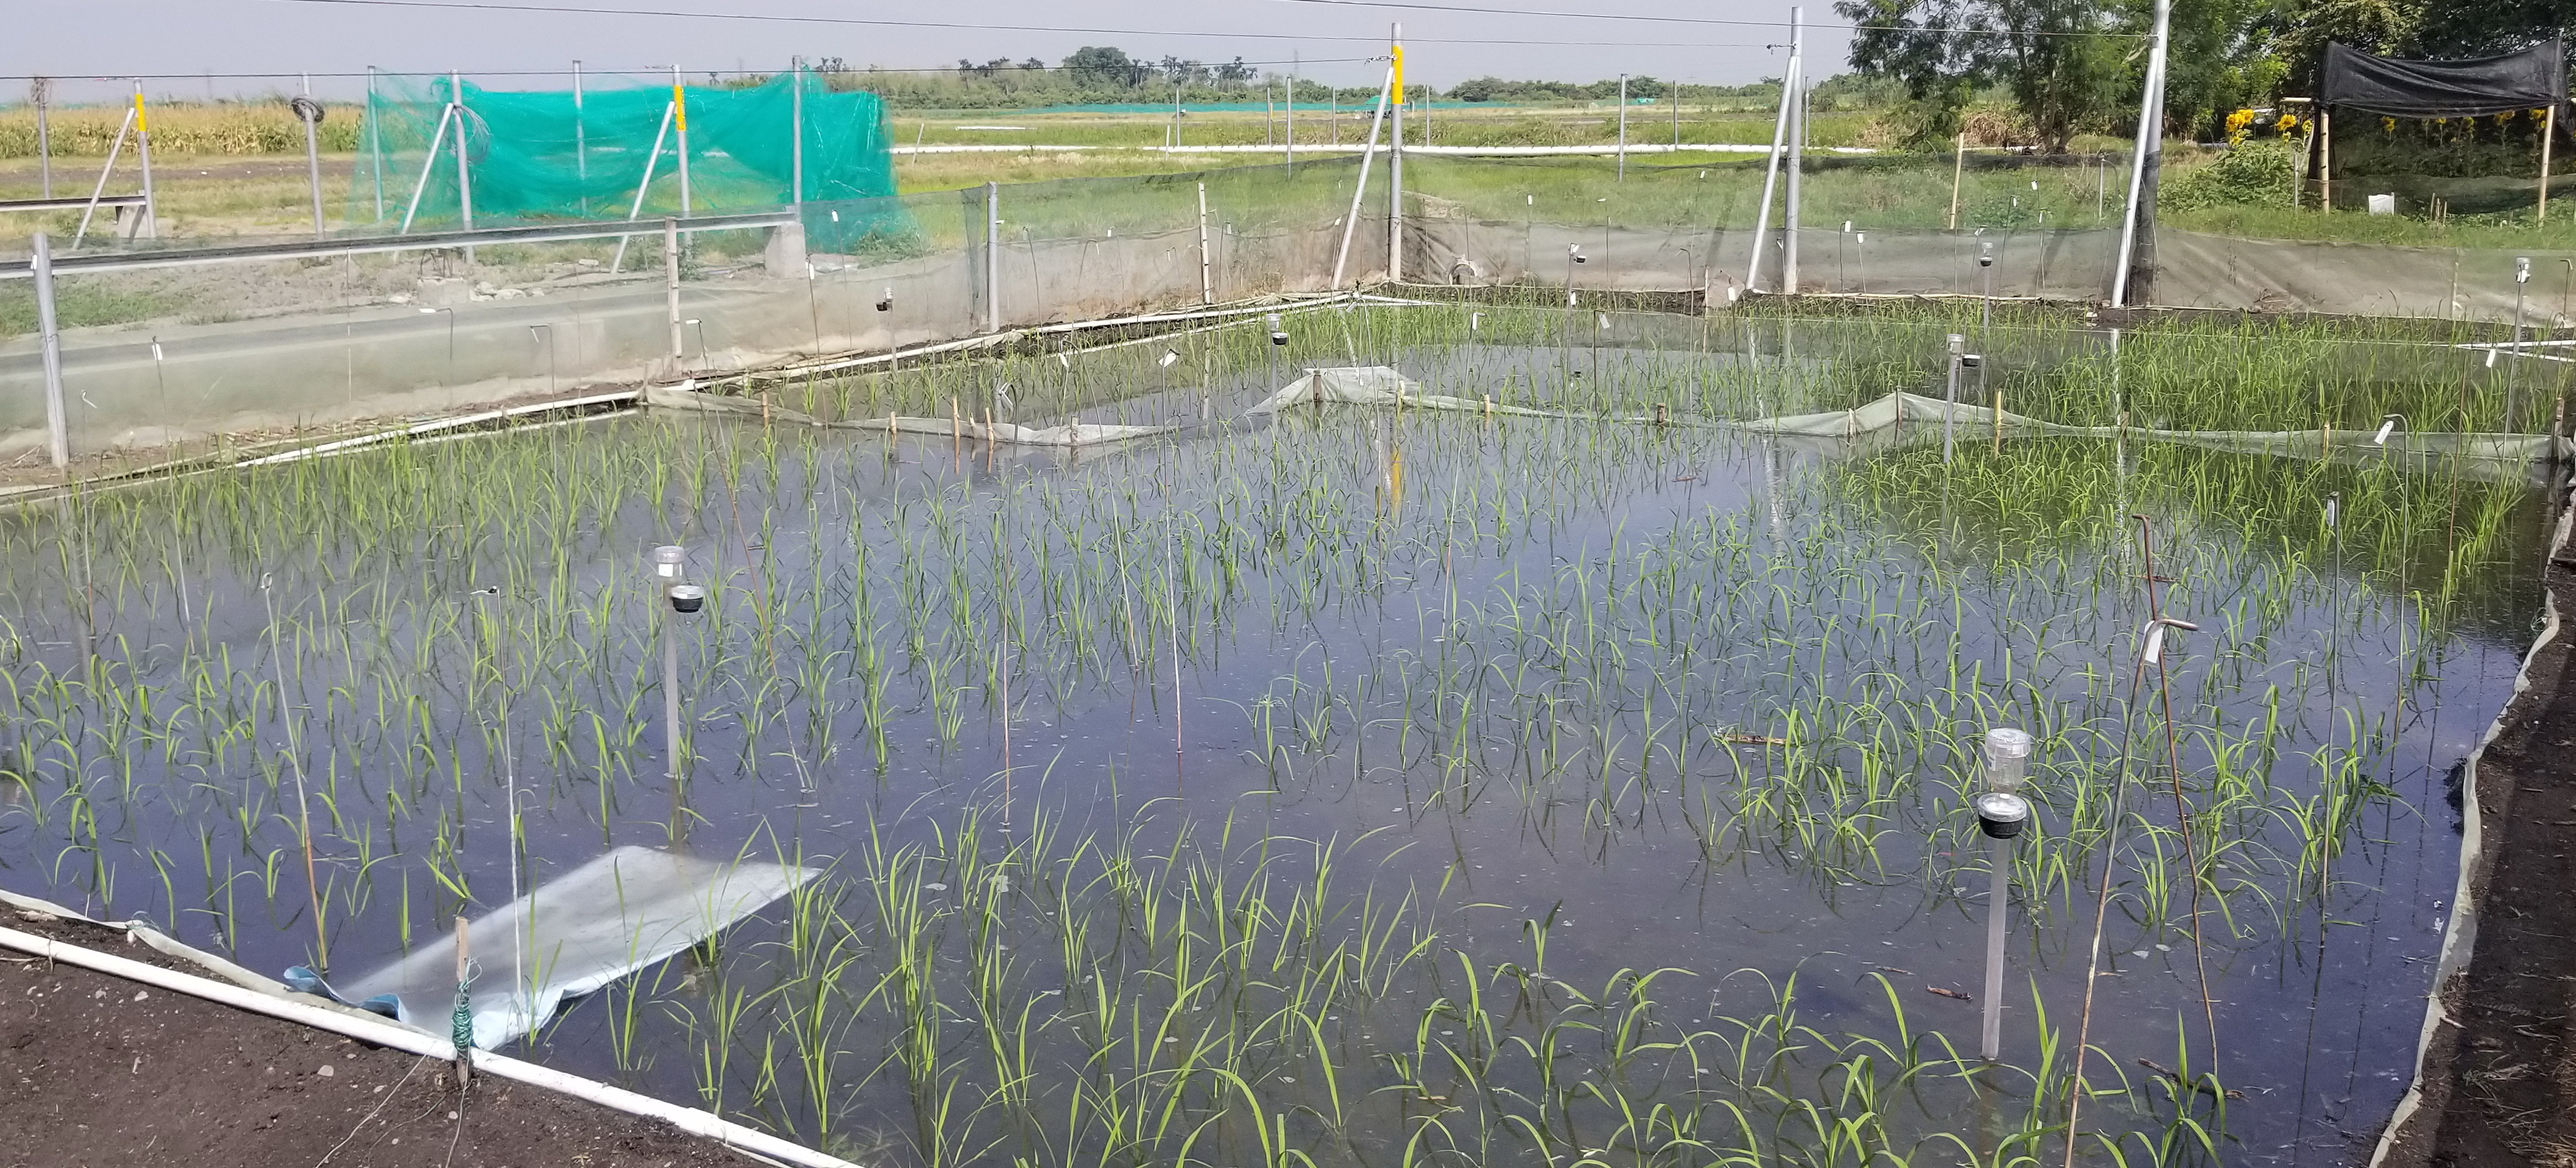 Methylene blue staining and radial water loss on field-grown rice plants